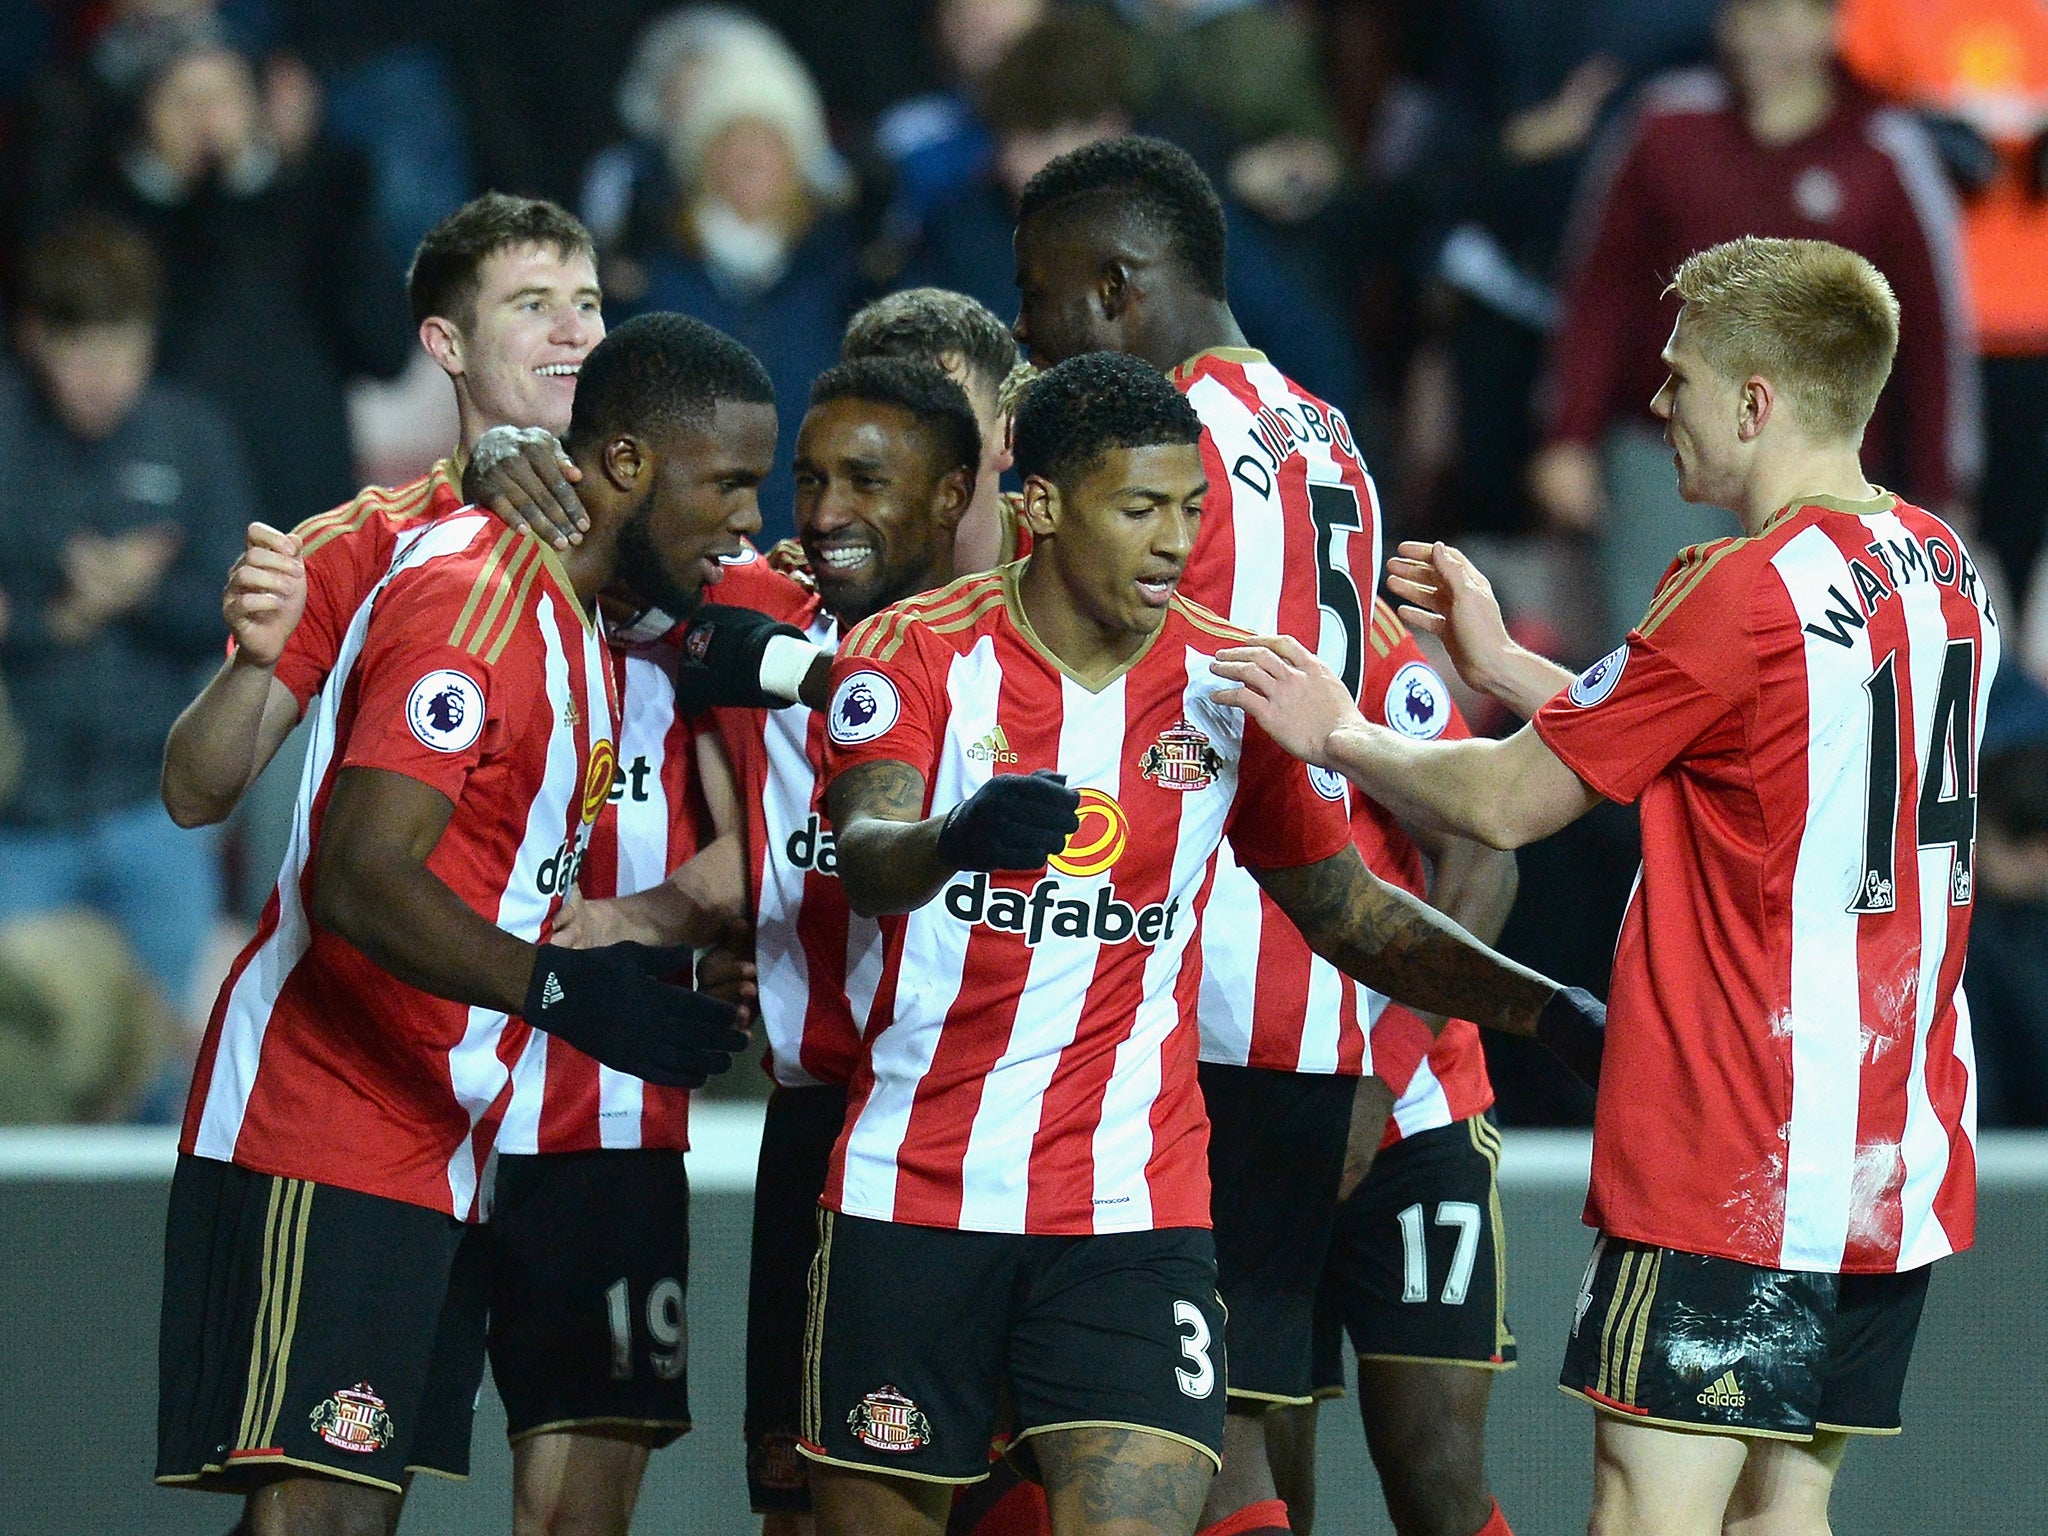 Sunderland's players celebrate Anichebe's second goal at the Stadium of Light